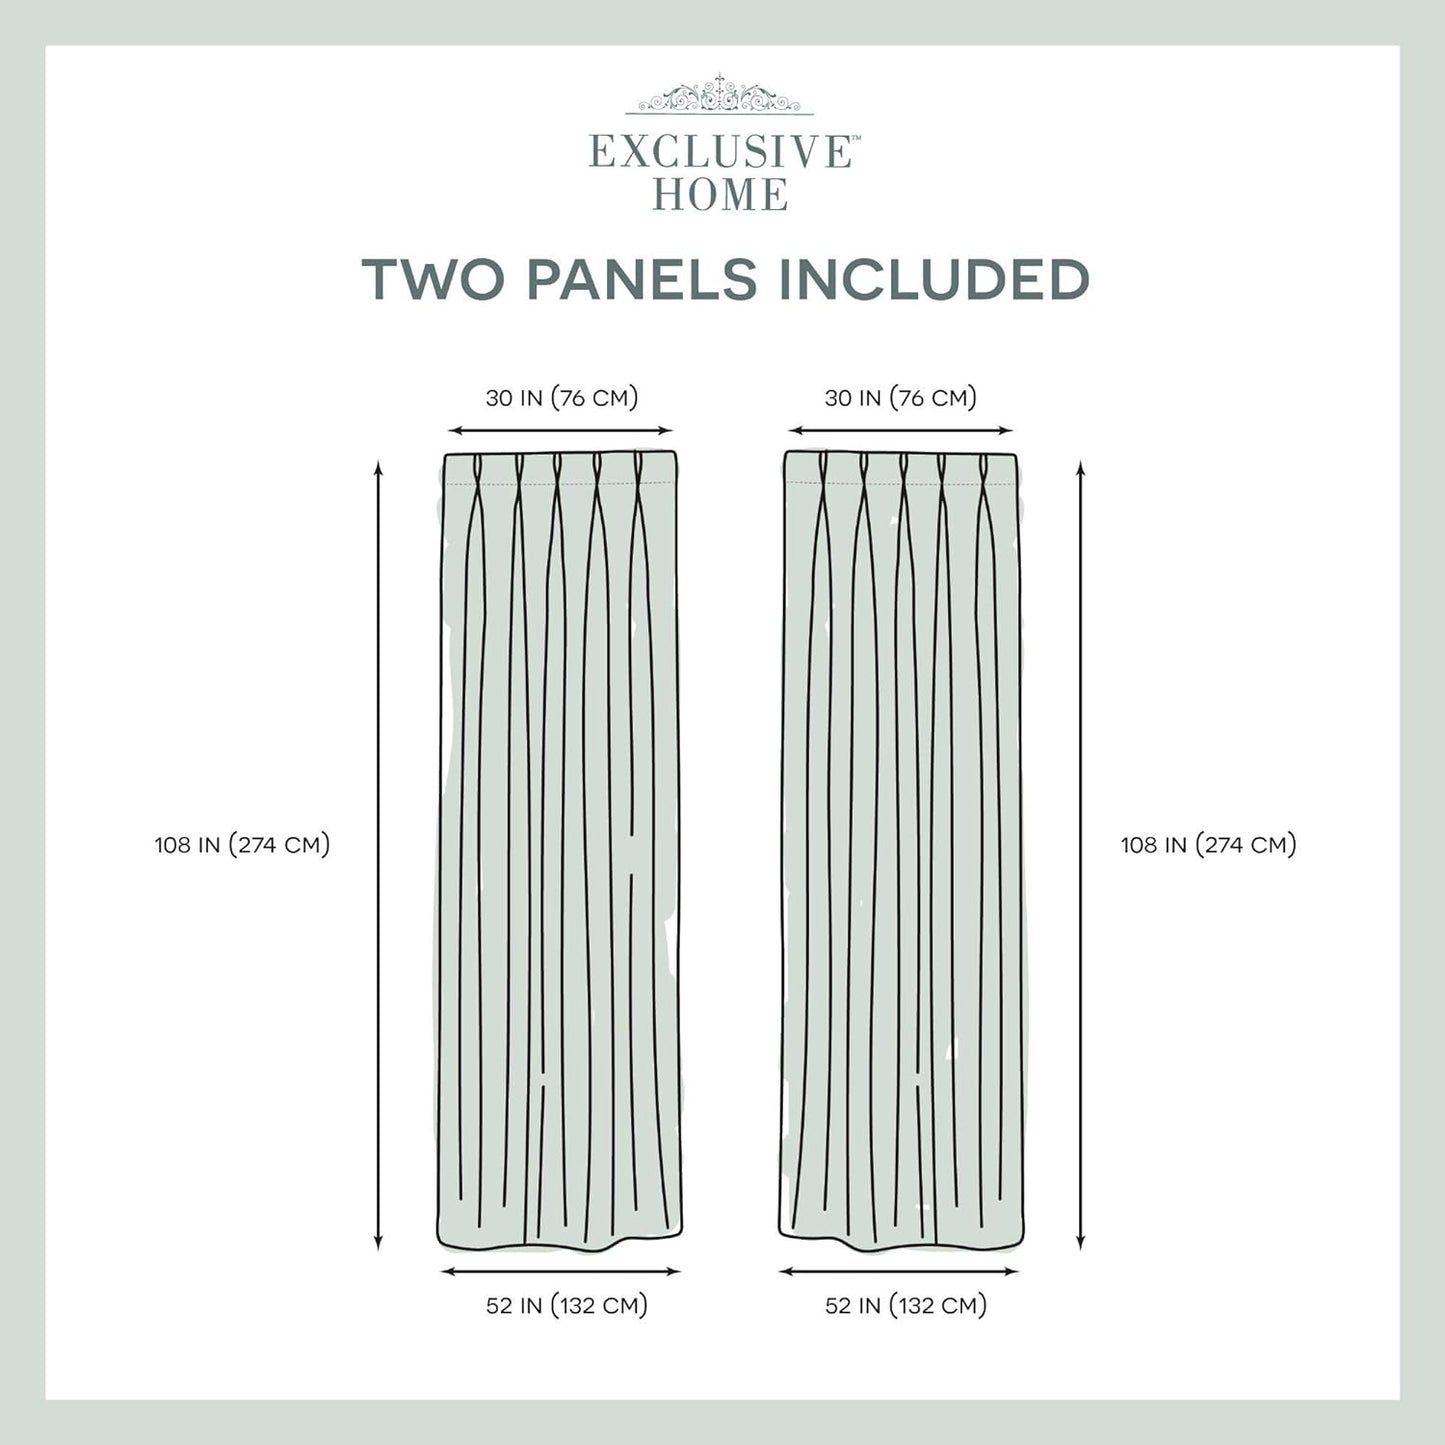 Exclusive Home Sateen Twill Woven Room Darkening Blackout Pinch Pleat/Hidden Tab Top Curtain Panel Pair, 108" Length, Vanilla  Exclusive Home Curtains   